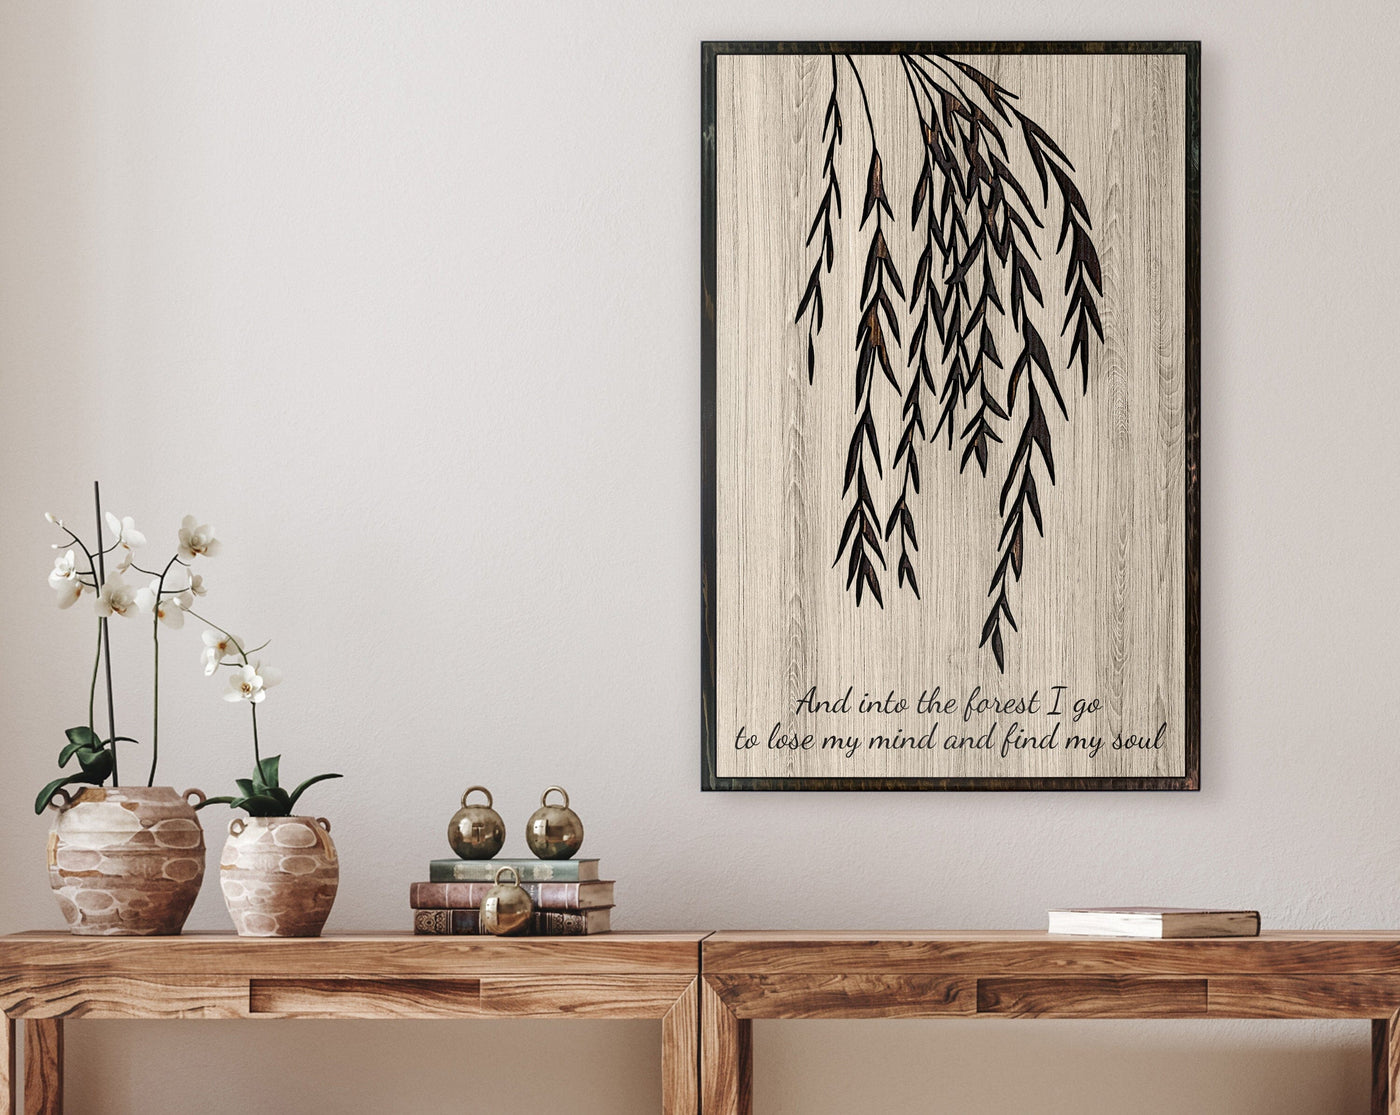 Custom Willow Tree Wood Wall Art: Handcrafted with precision, this stunning wood wall art features a beautifully carved willow tree design. Personalize with names, dates, or a special message for a heartfelt touch. A perfect addition to any room's decor, bringing the charm of nature and the warmth of personalization together.